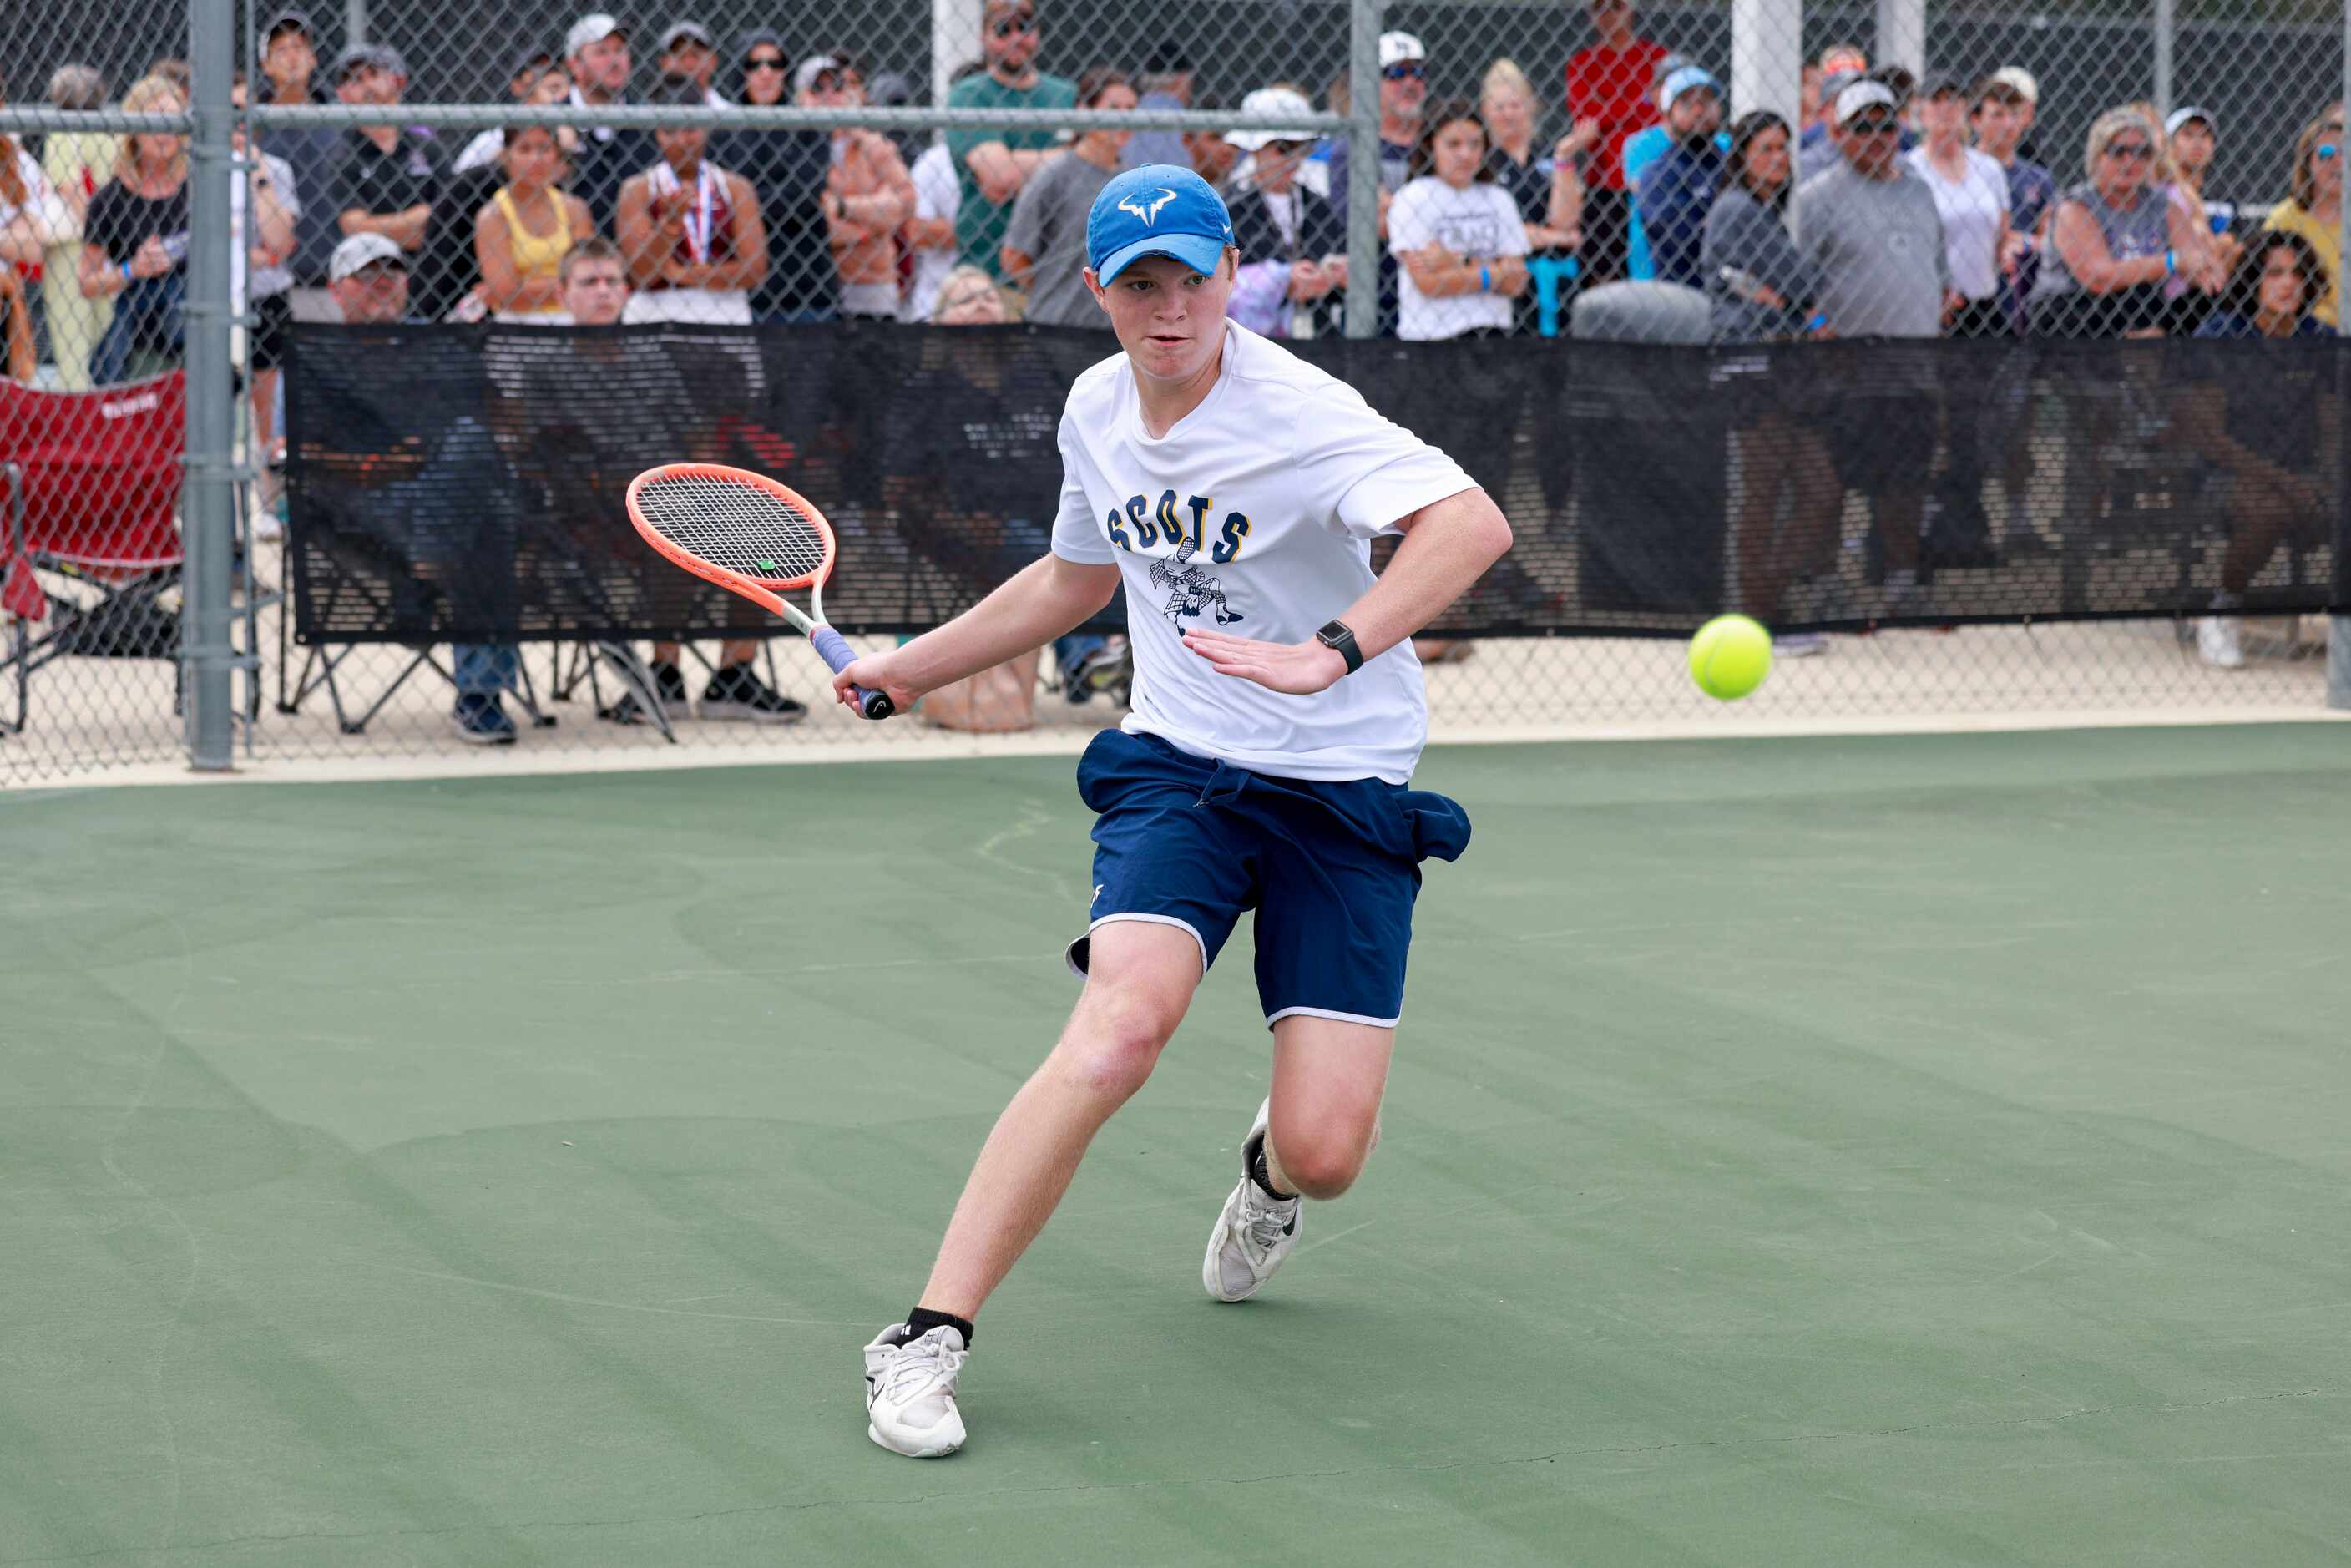 Highland Park’s Carl Newell runs to hit a return during the 5A boys doubles championship...